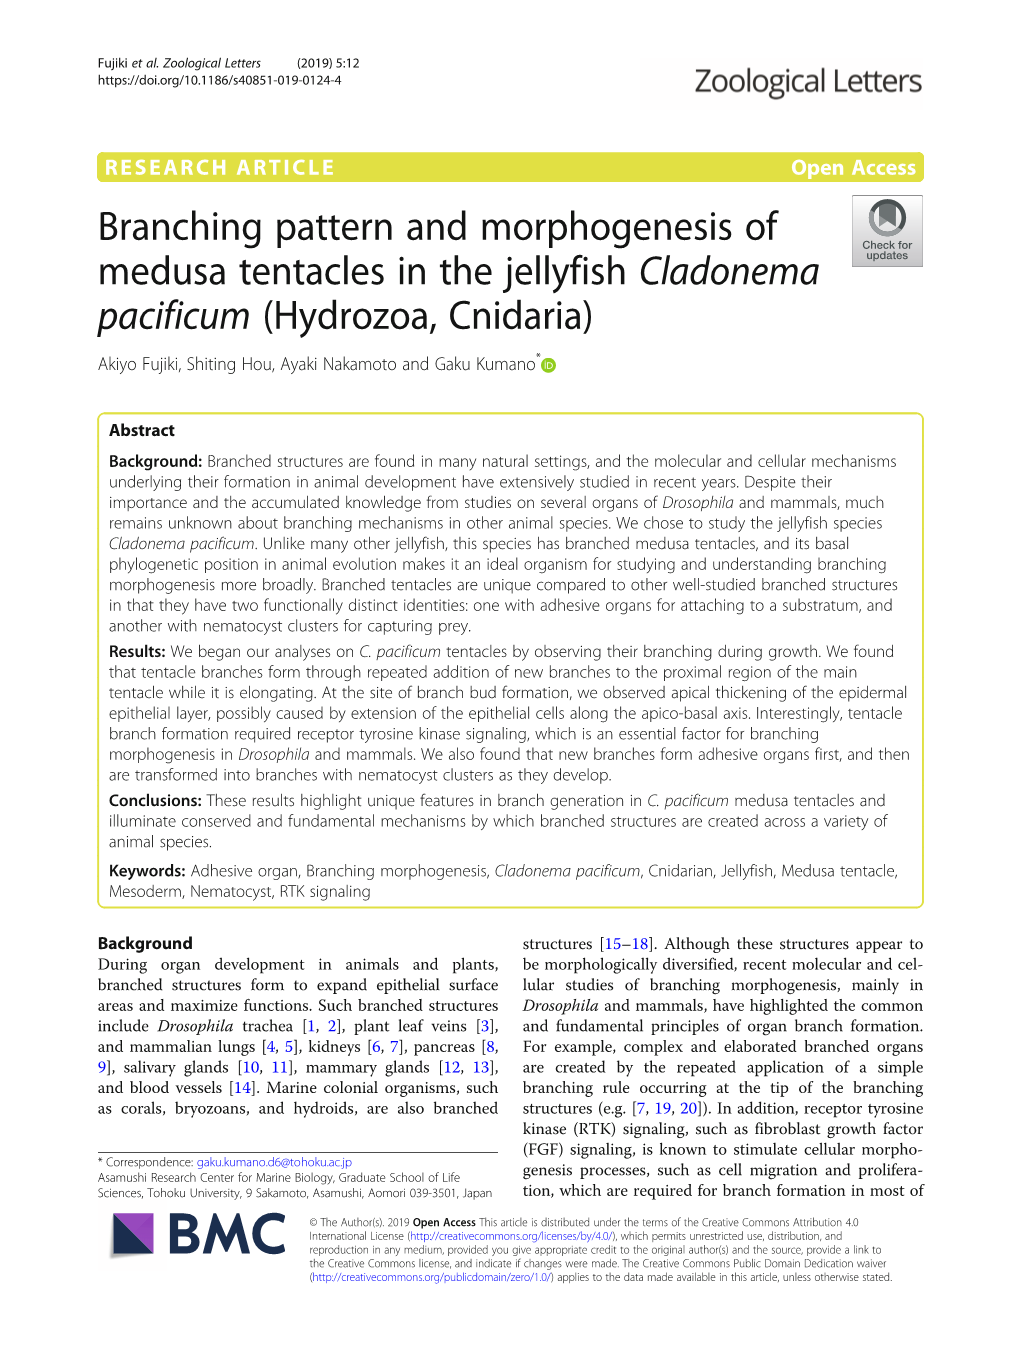 Branching Pattern and Morphogenesis of Medusa Tentacles in the Jellyfish